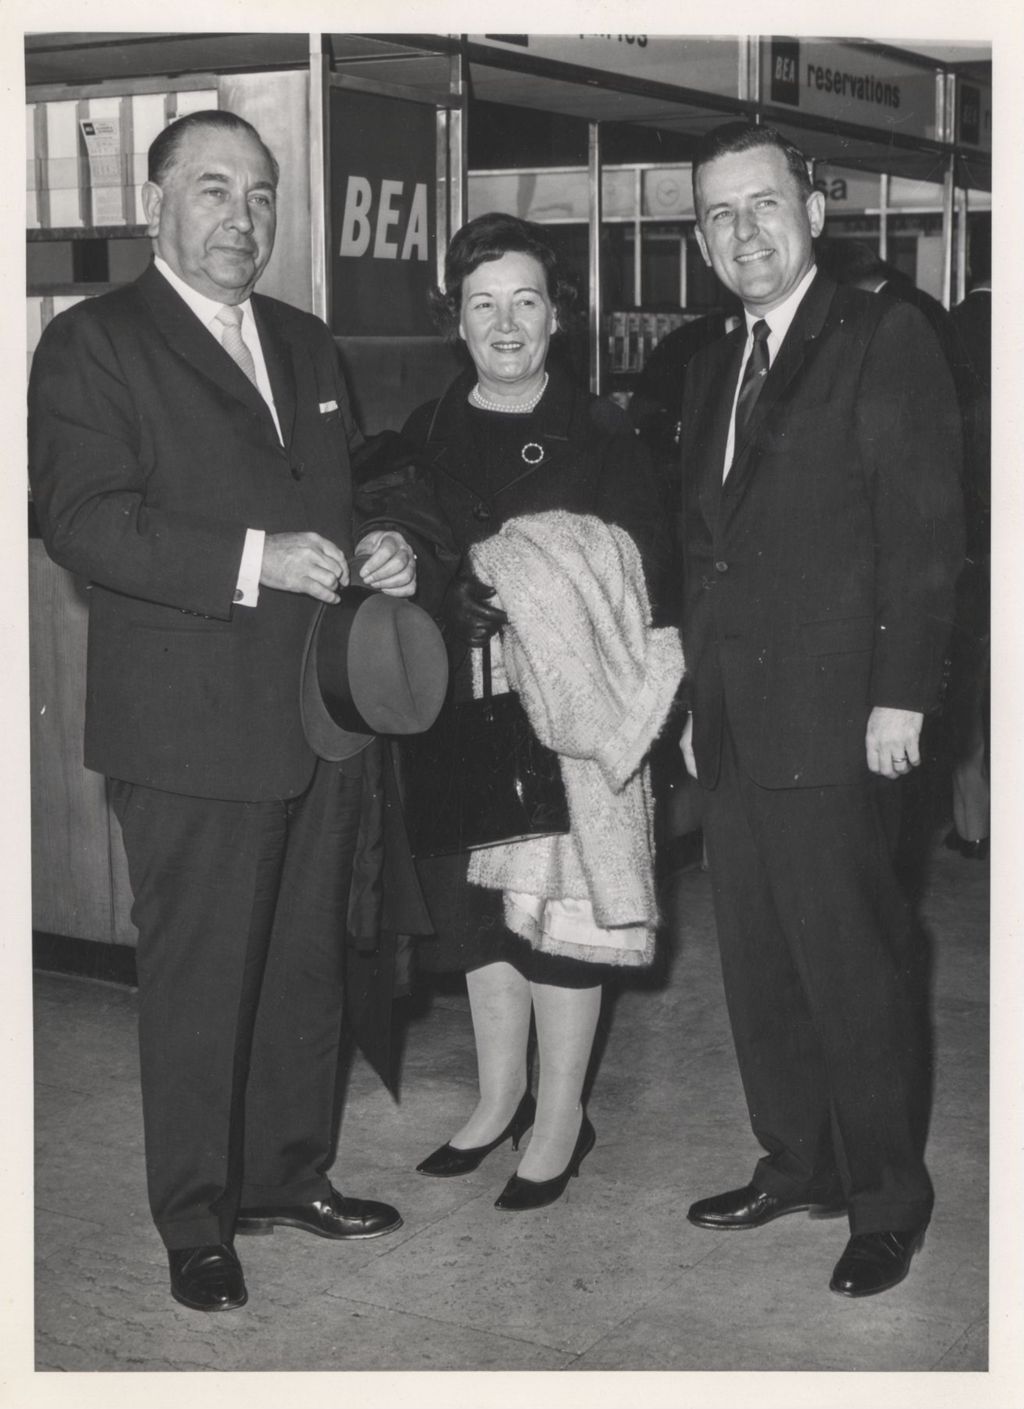 Miniature of Richard J. Daley and Eleanor Daley at the airport in London